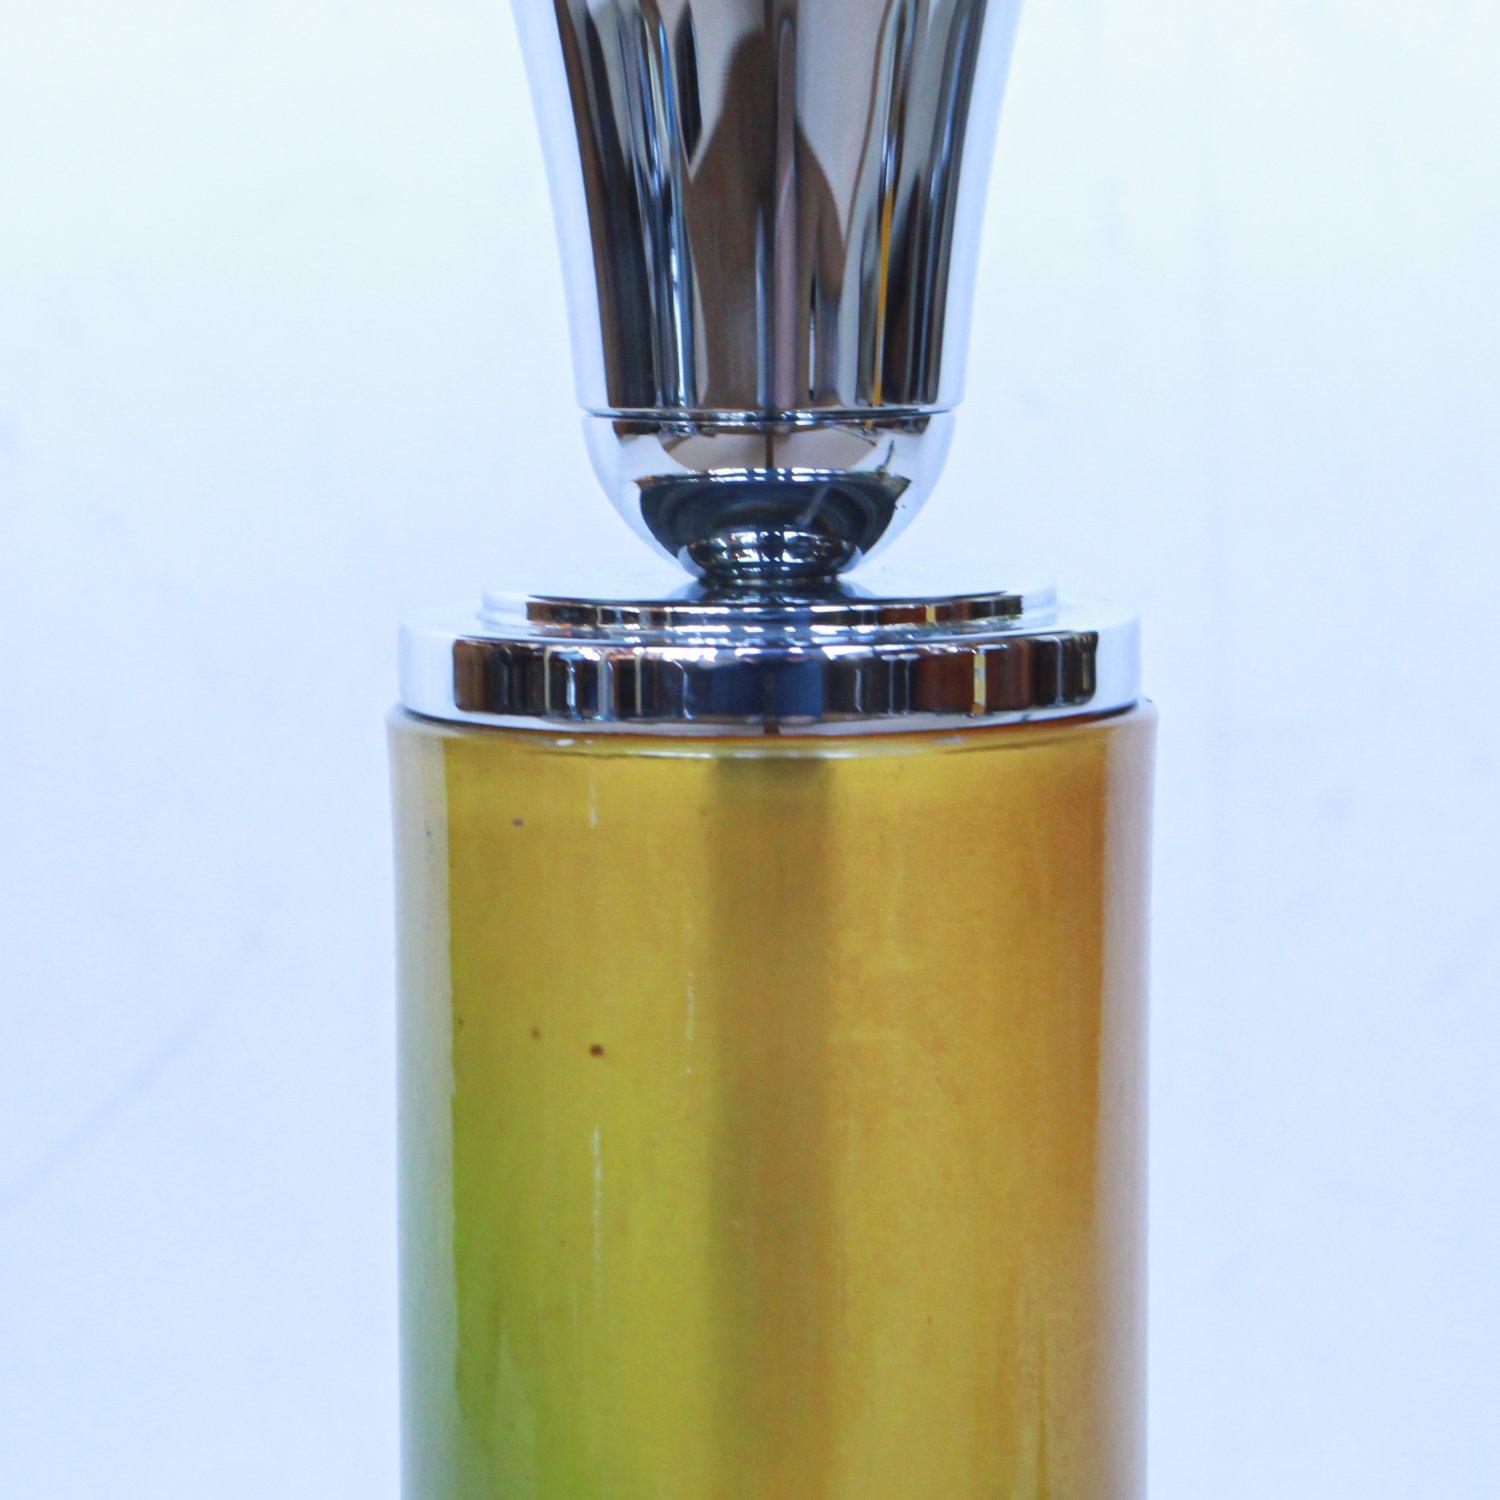 An Art Deco table lamp with chromed metal dome shade. Original green to yellow gradient tone, reeded bakelite stem over a chrome metal base. Green bakelite finial to top. Some replacement parts.

Fully refurbished, re-wired and re-chromed. Some